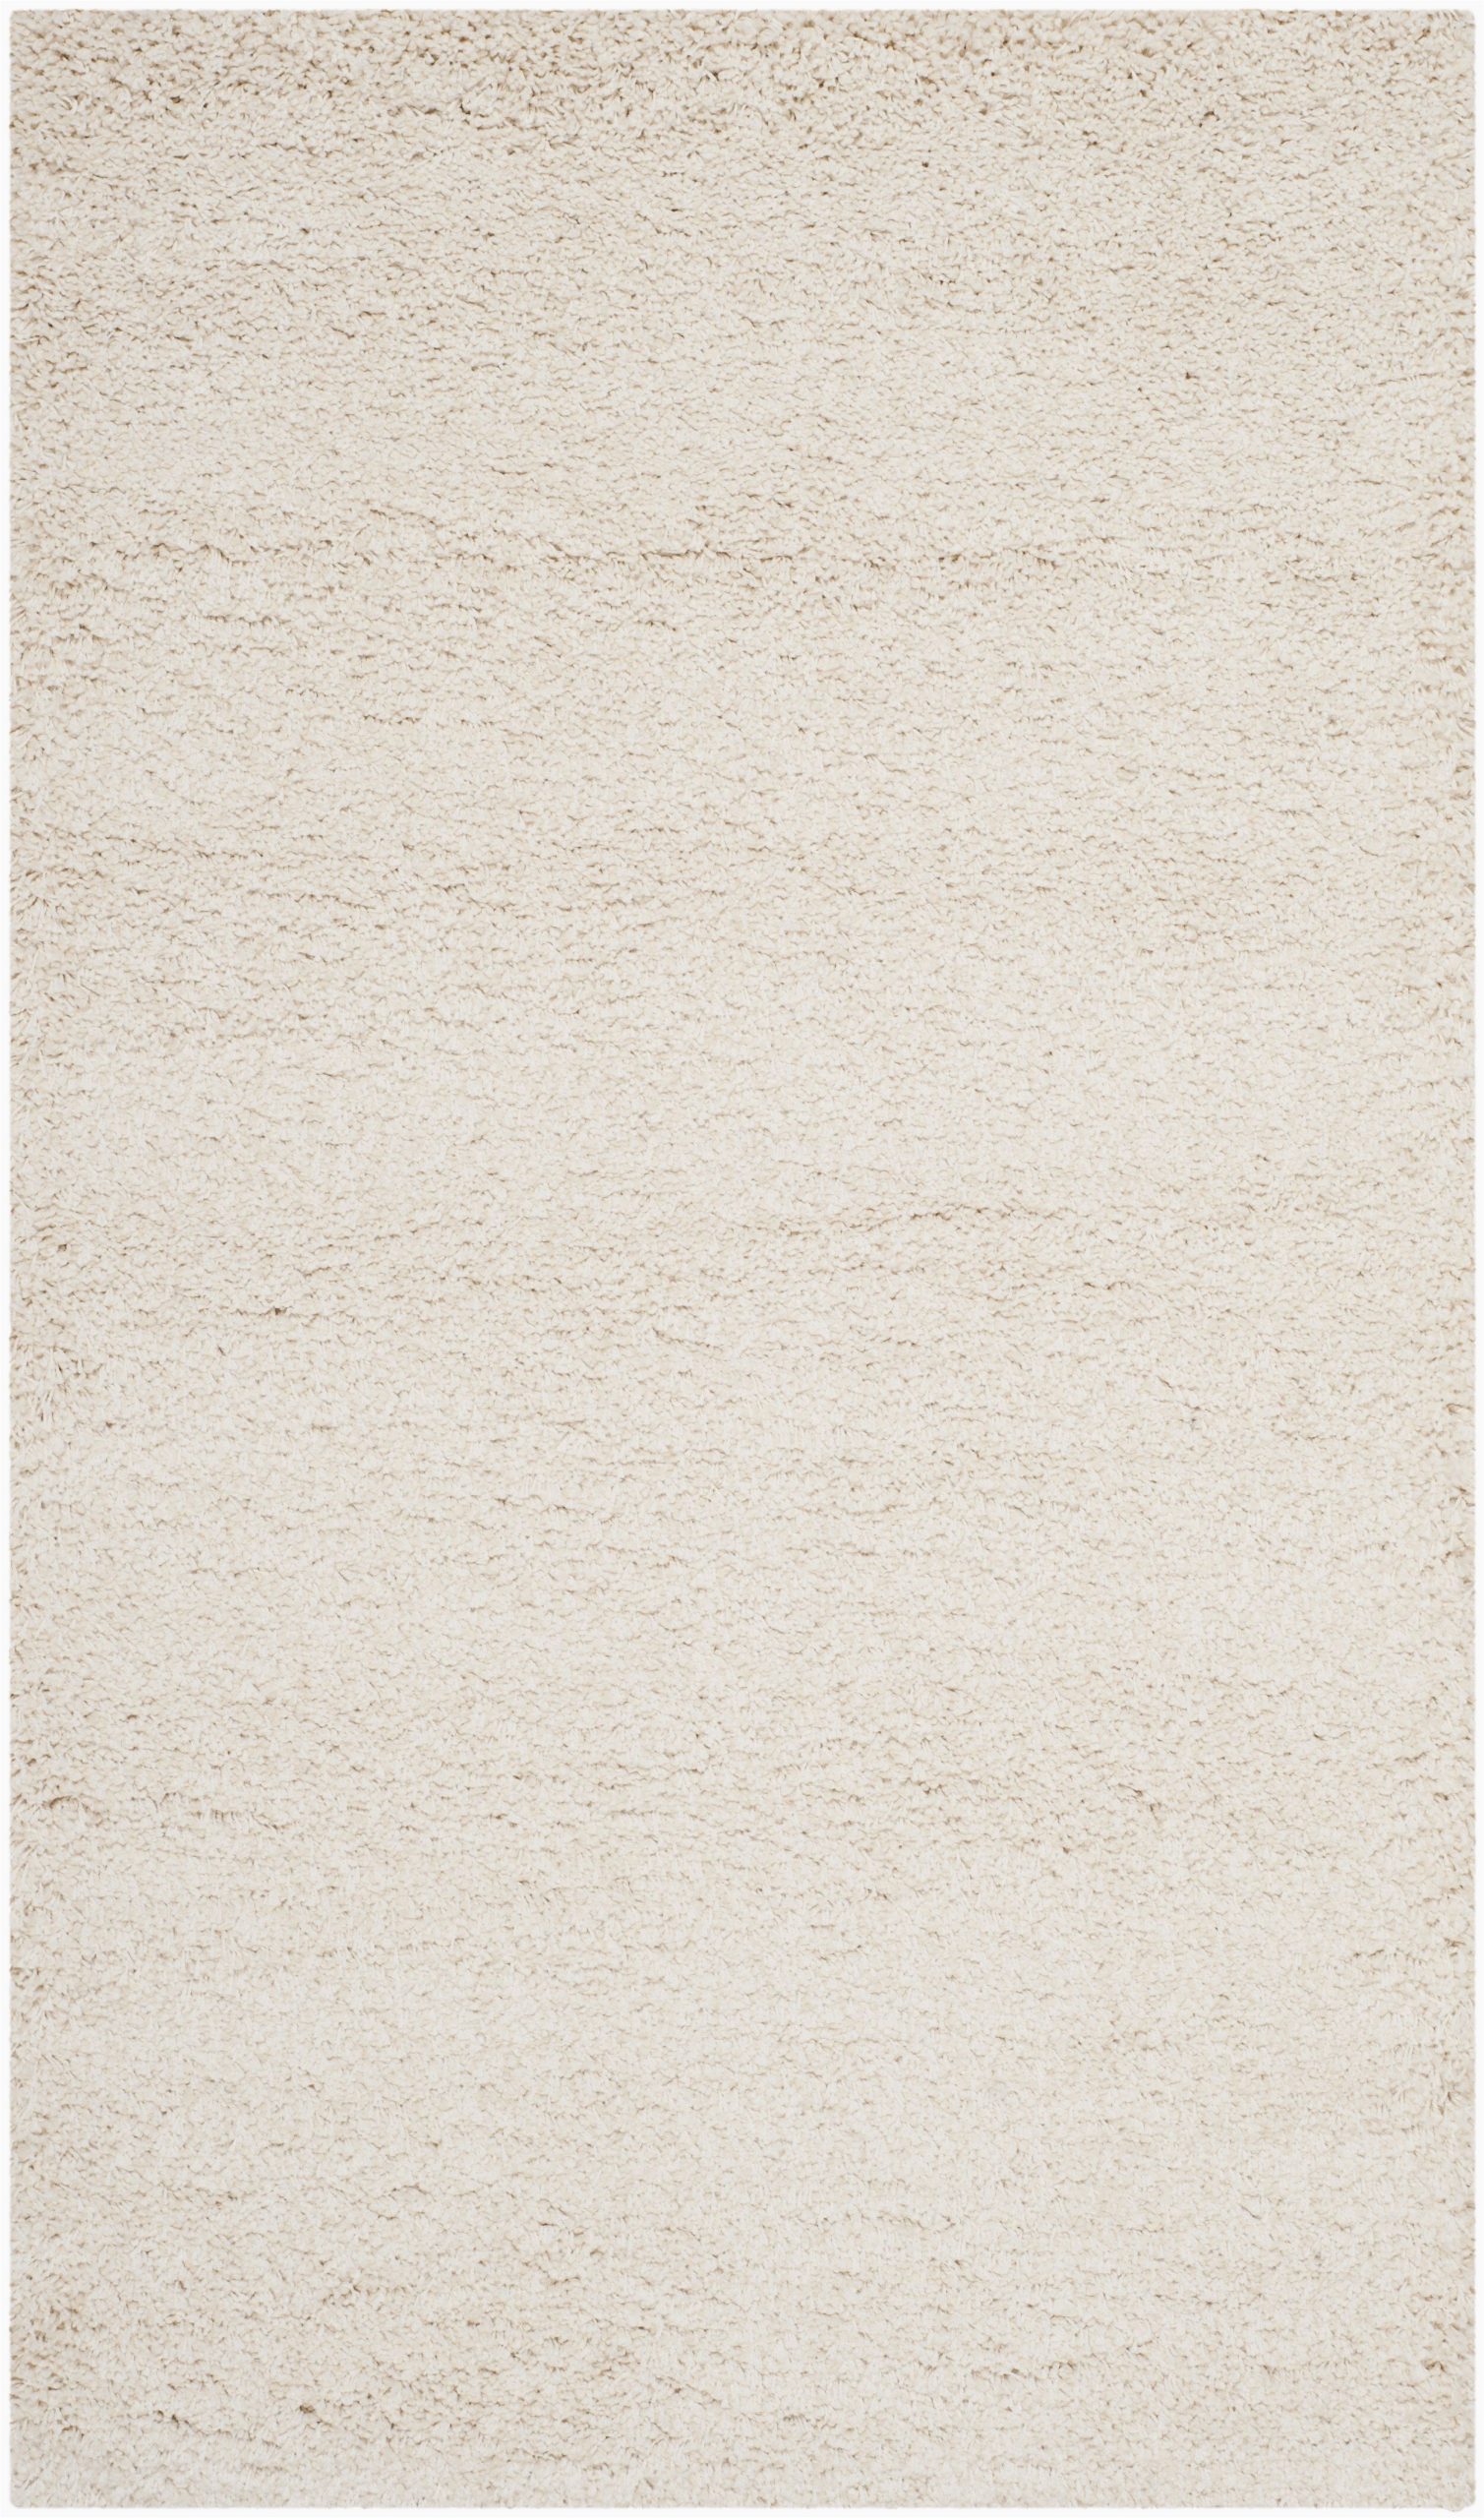 Starr Hill Ivory area Rug Starr Hill solid Ivory area Rug